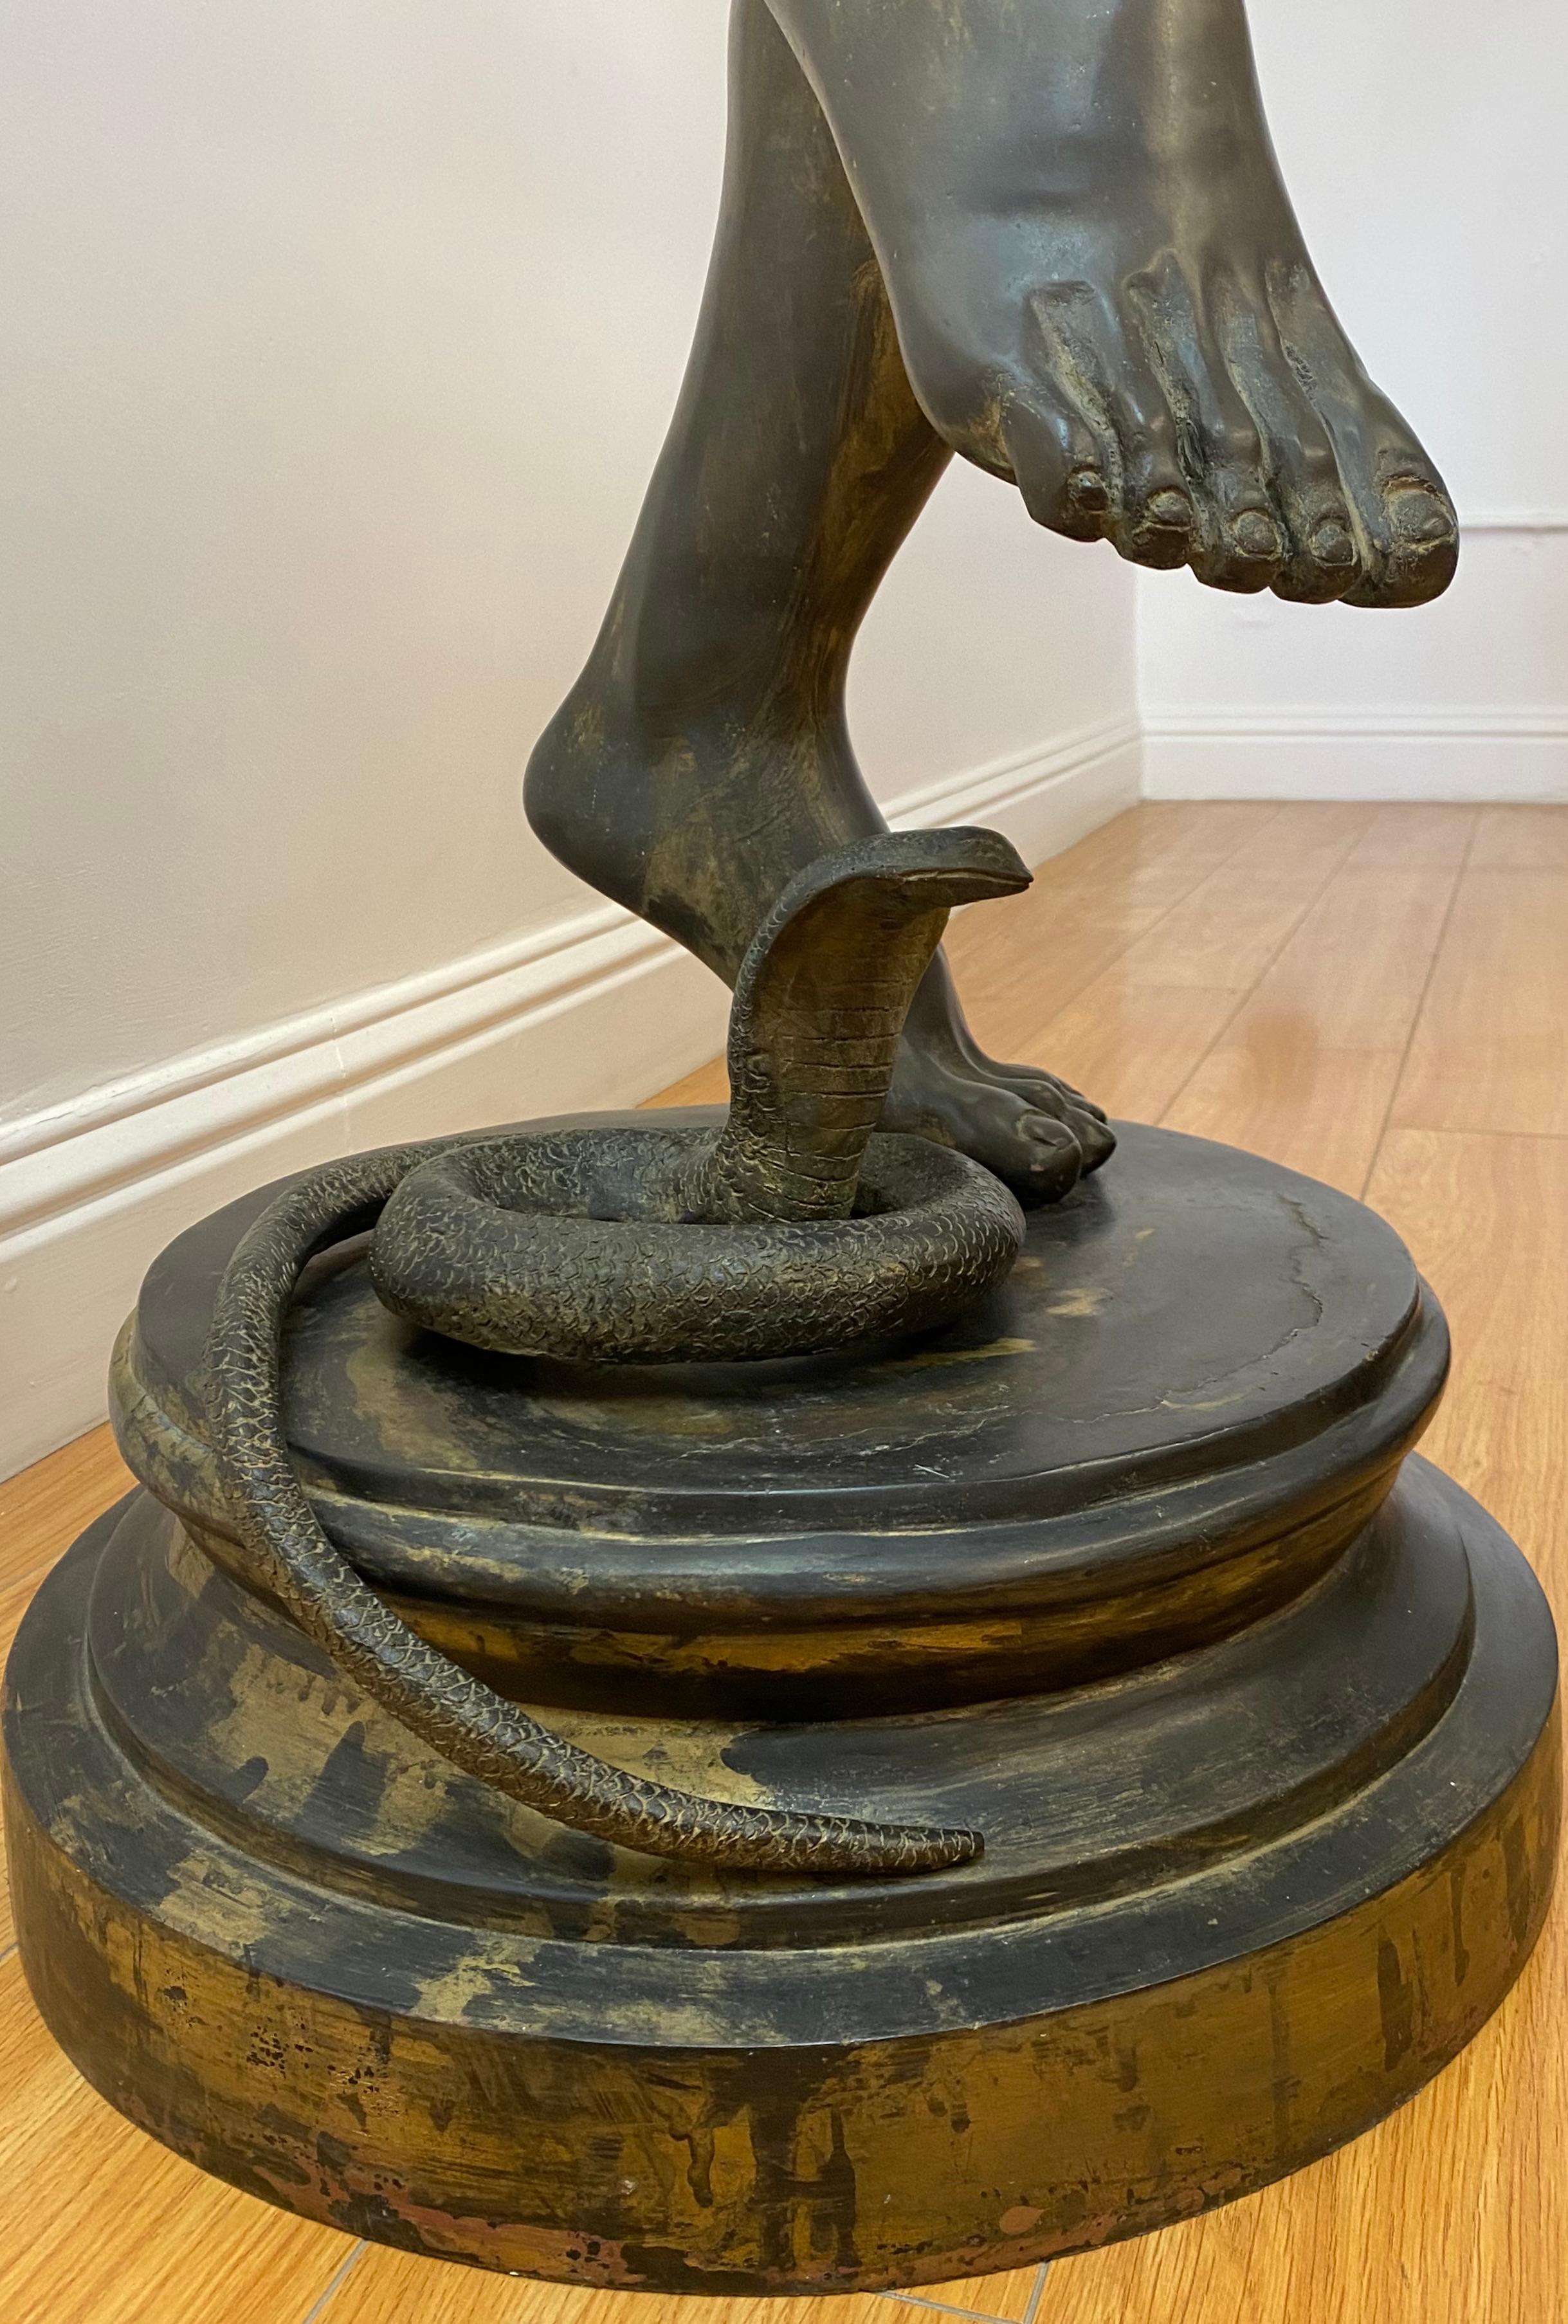 Rare Life Size Bronze Sculpture/Statue by Julius Emil Epple C.1920

Stately bronze sculpture/statue by listed German sculptor depicting a snake charmer

The snake charmer measures 16